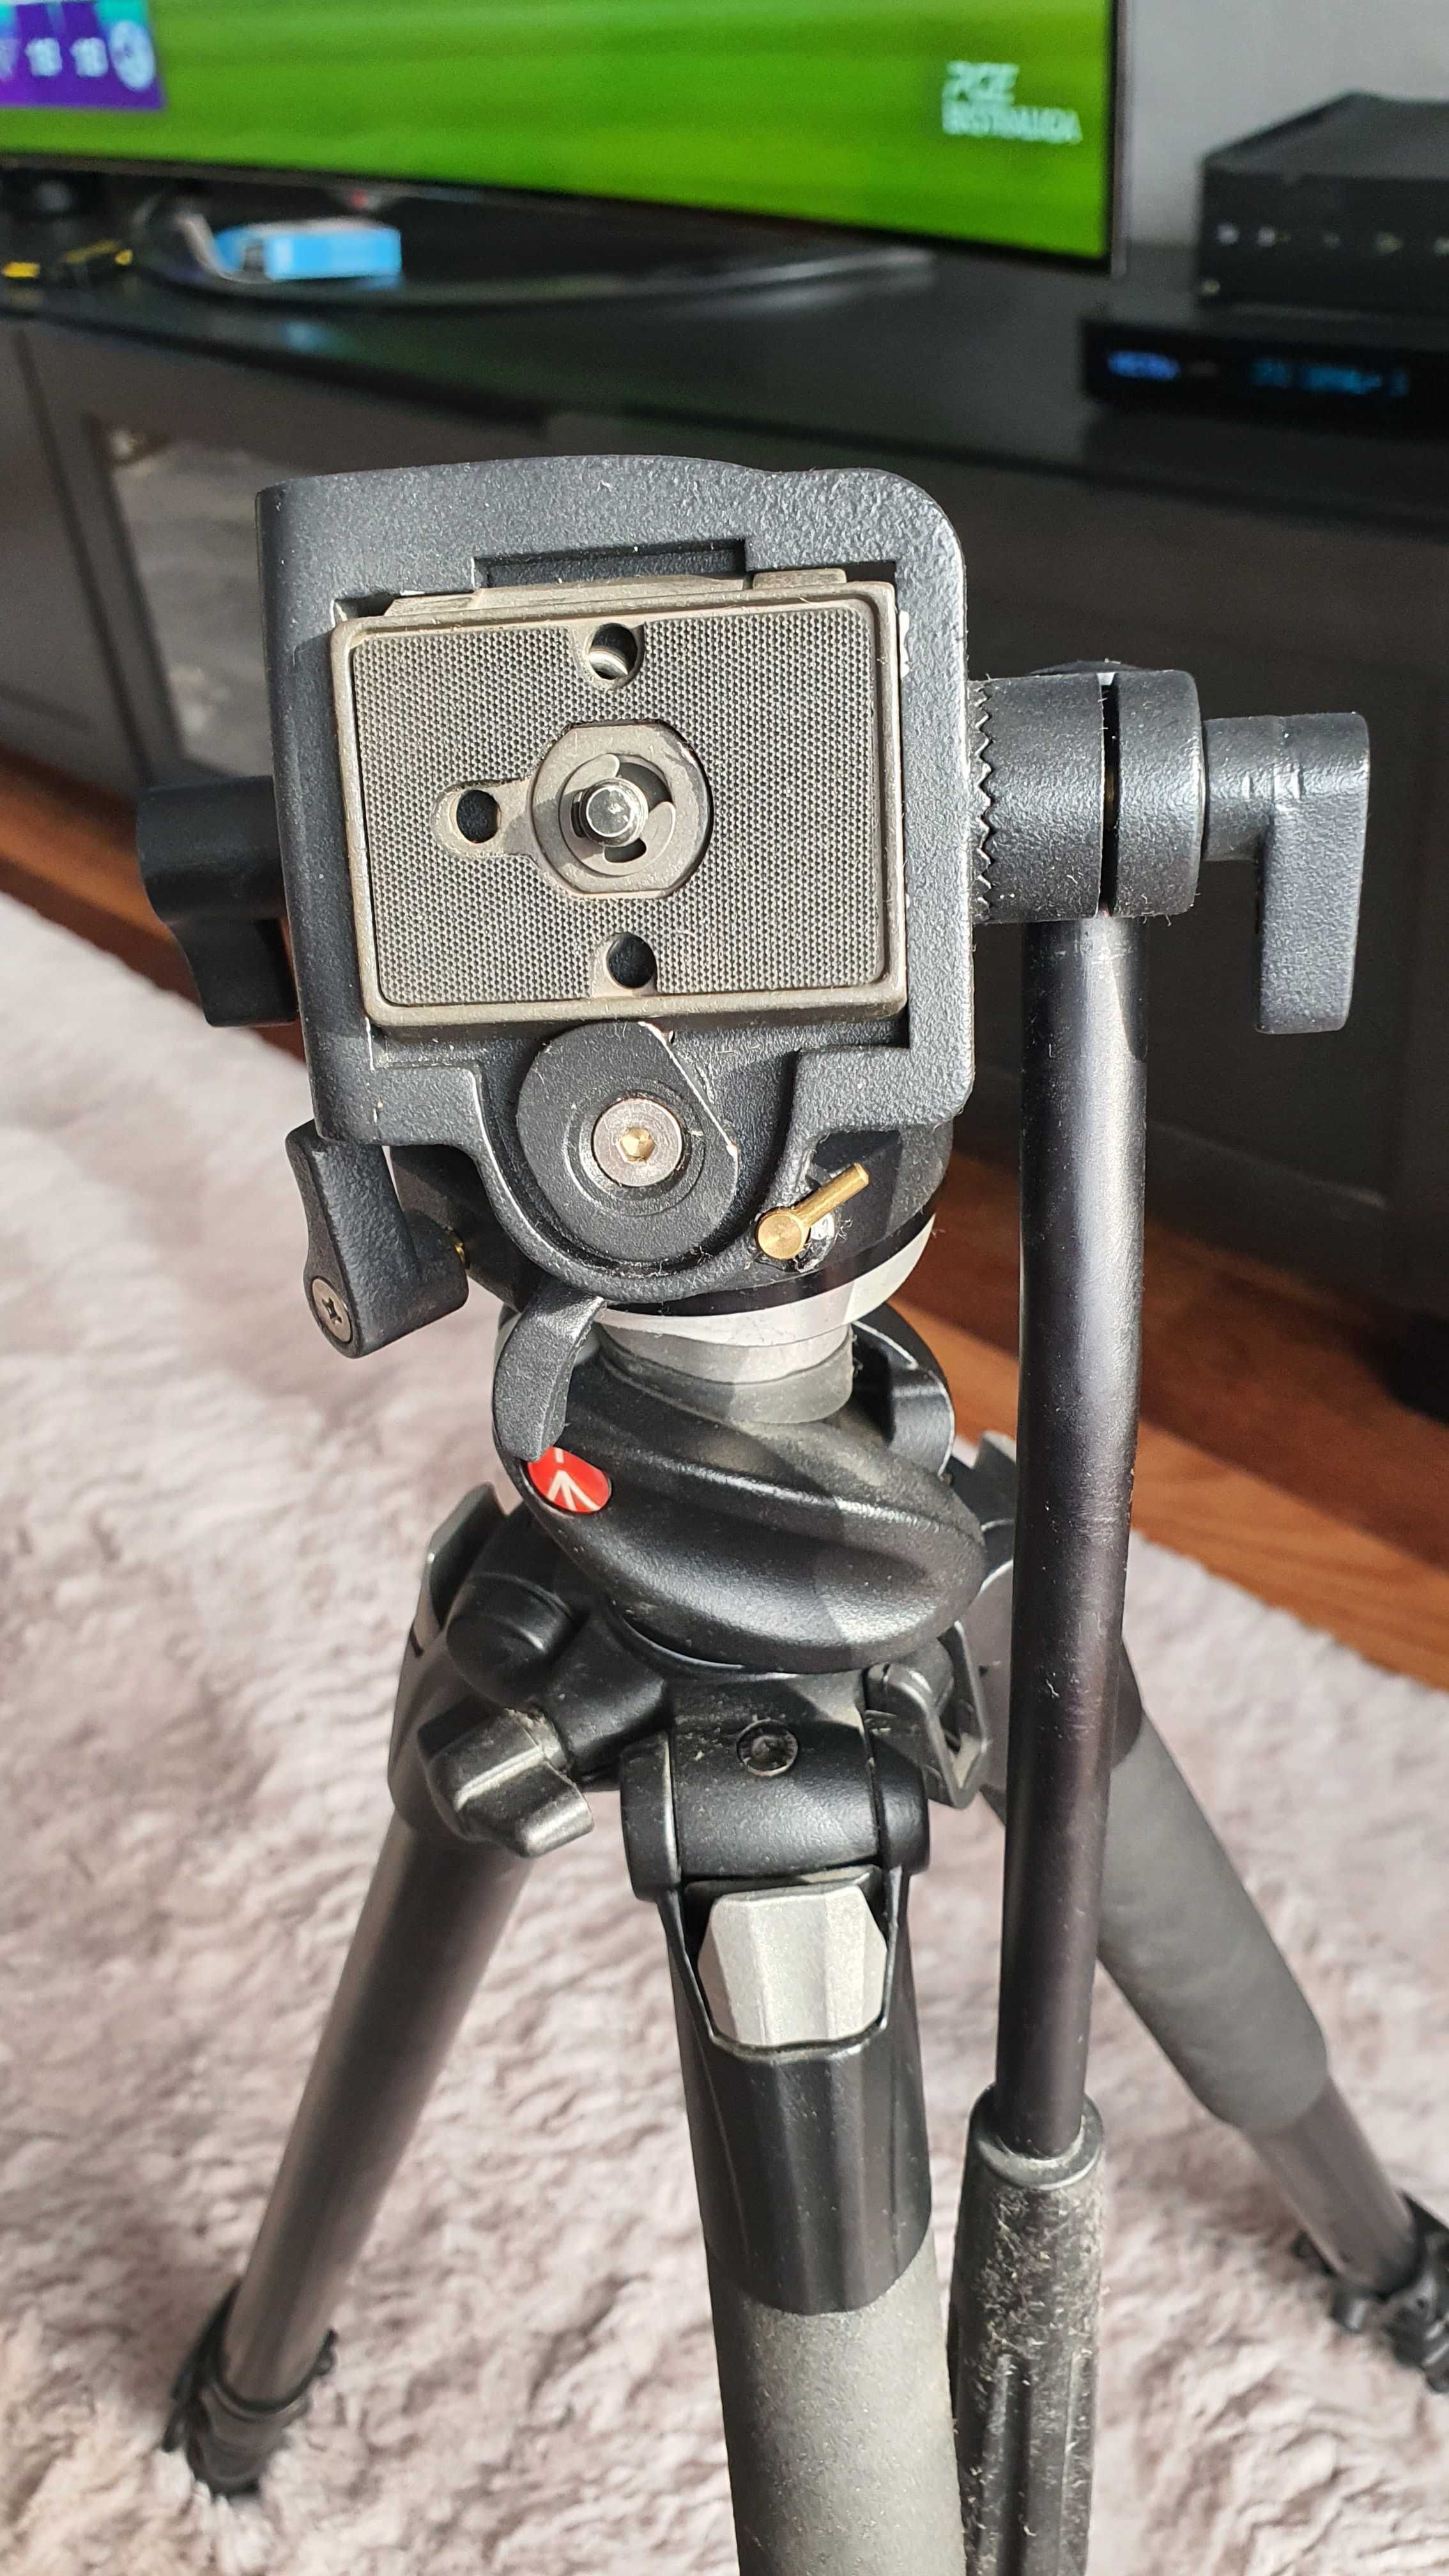 Statyw Manfrotto 055XPROB i głowica 322RC2